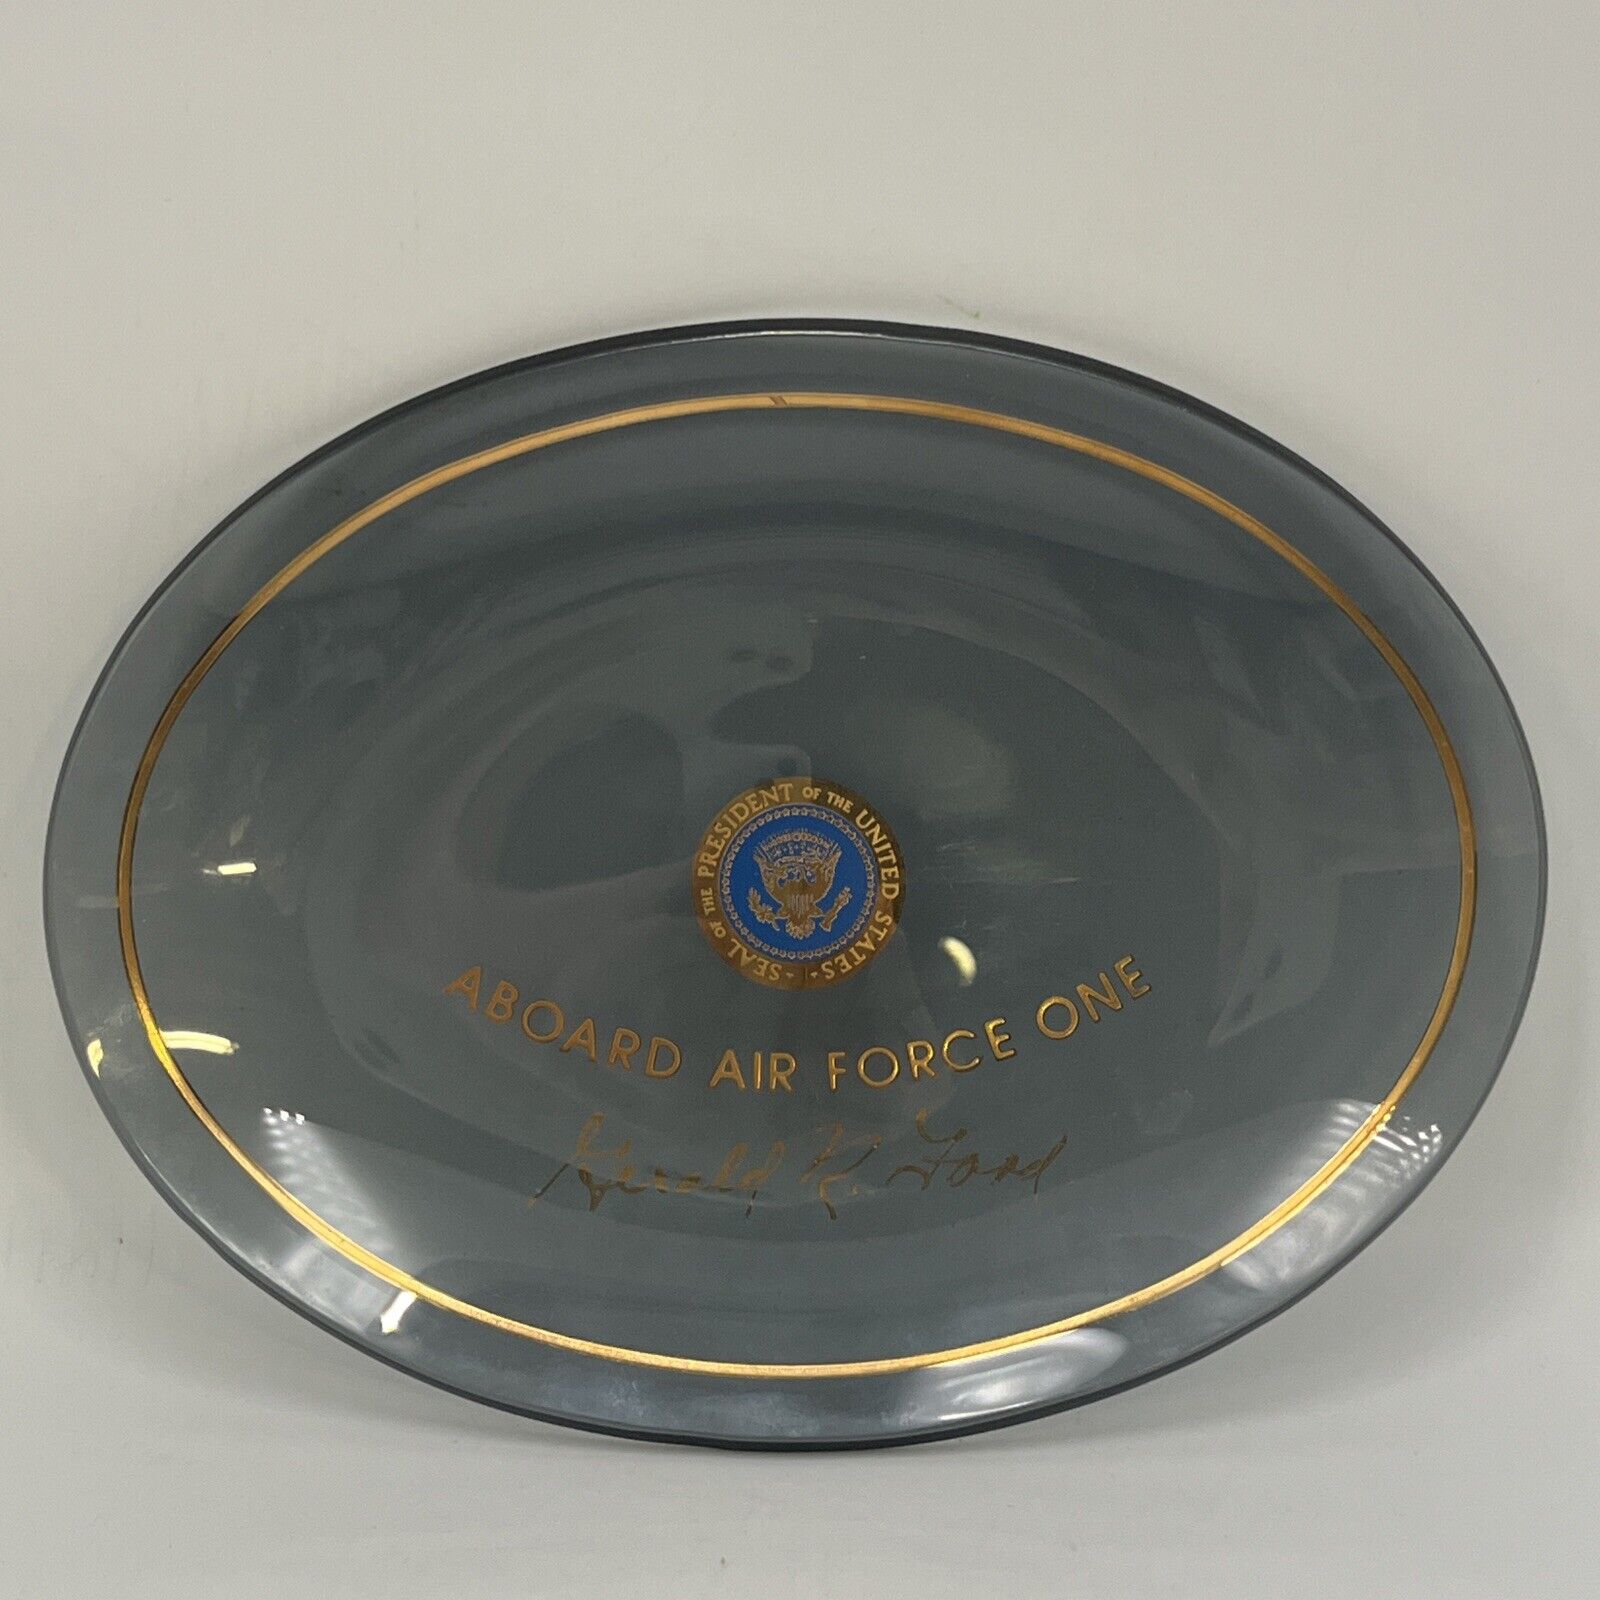 GERALD R FORD ABOARD AIR FORCE ONE SUPER RARE - HOUZE GLASS